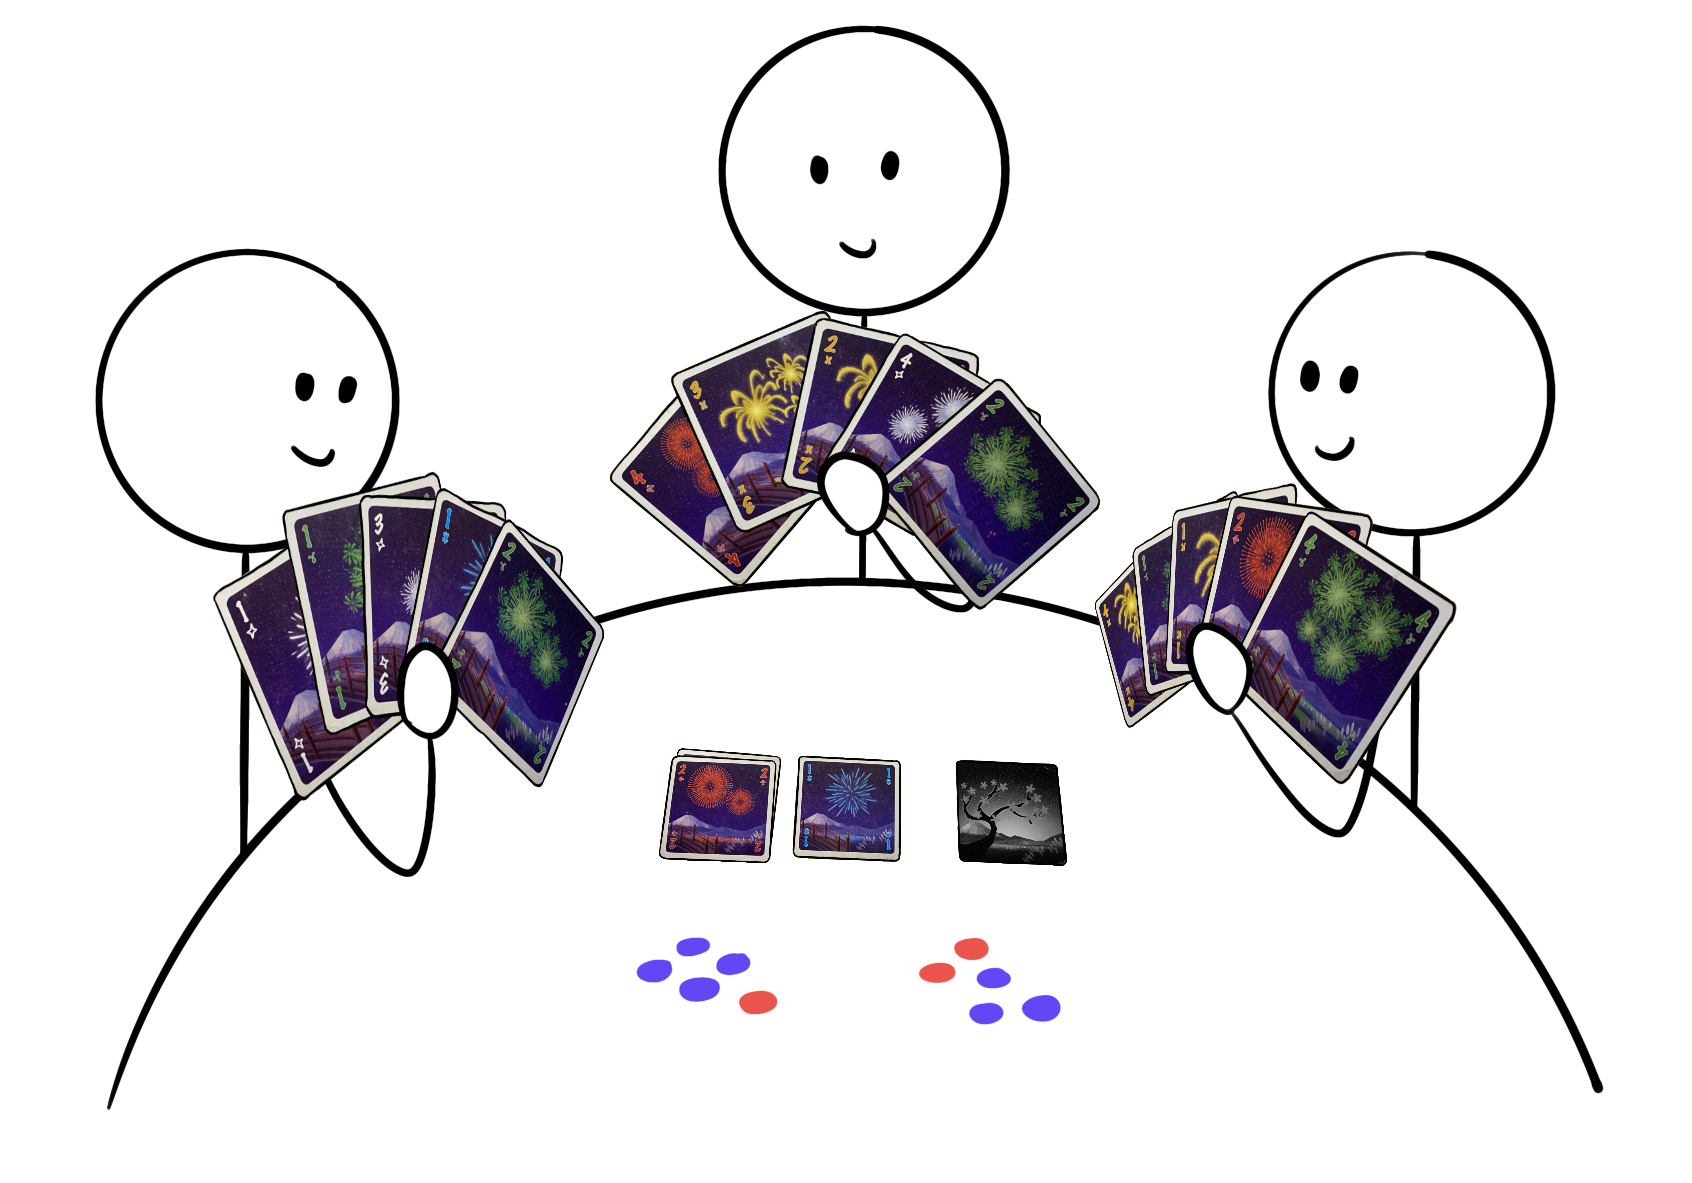 Three players at a table hold cards facing the other players. The cards have fireworks of different colours and in different quantities. On the table, there is a pile of red fireworks, a pile of blue fireworks, and a pile of unrevealed cards. There are also some blue and red tokens.